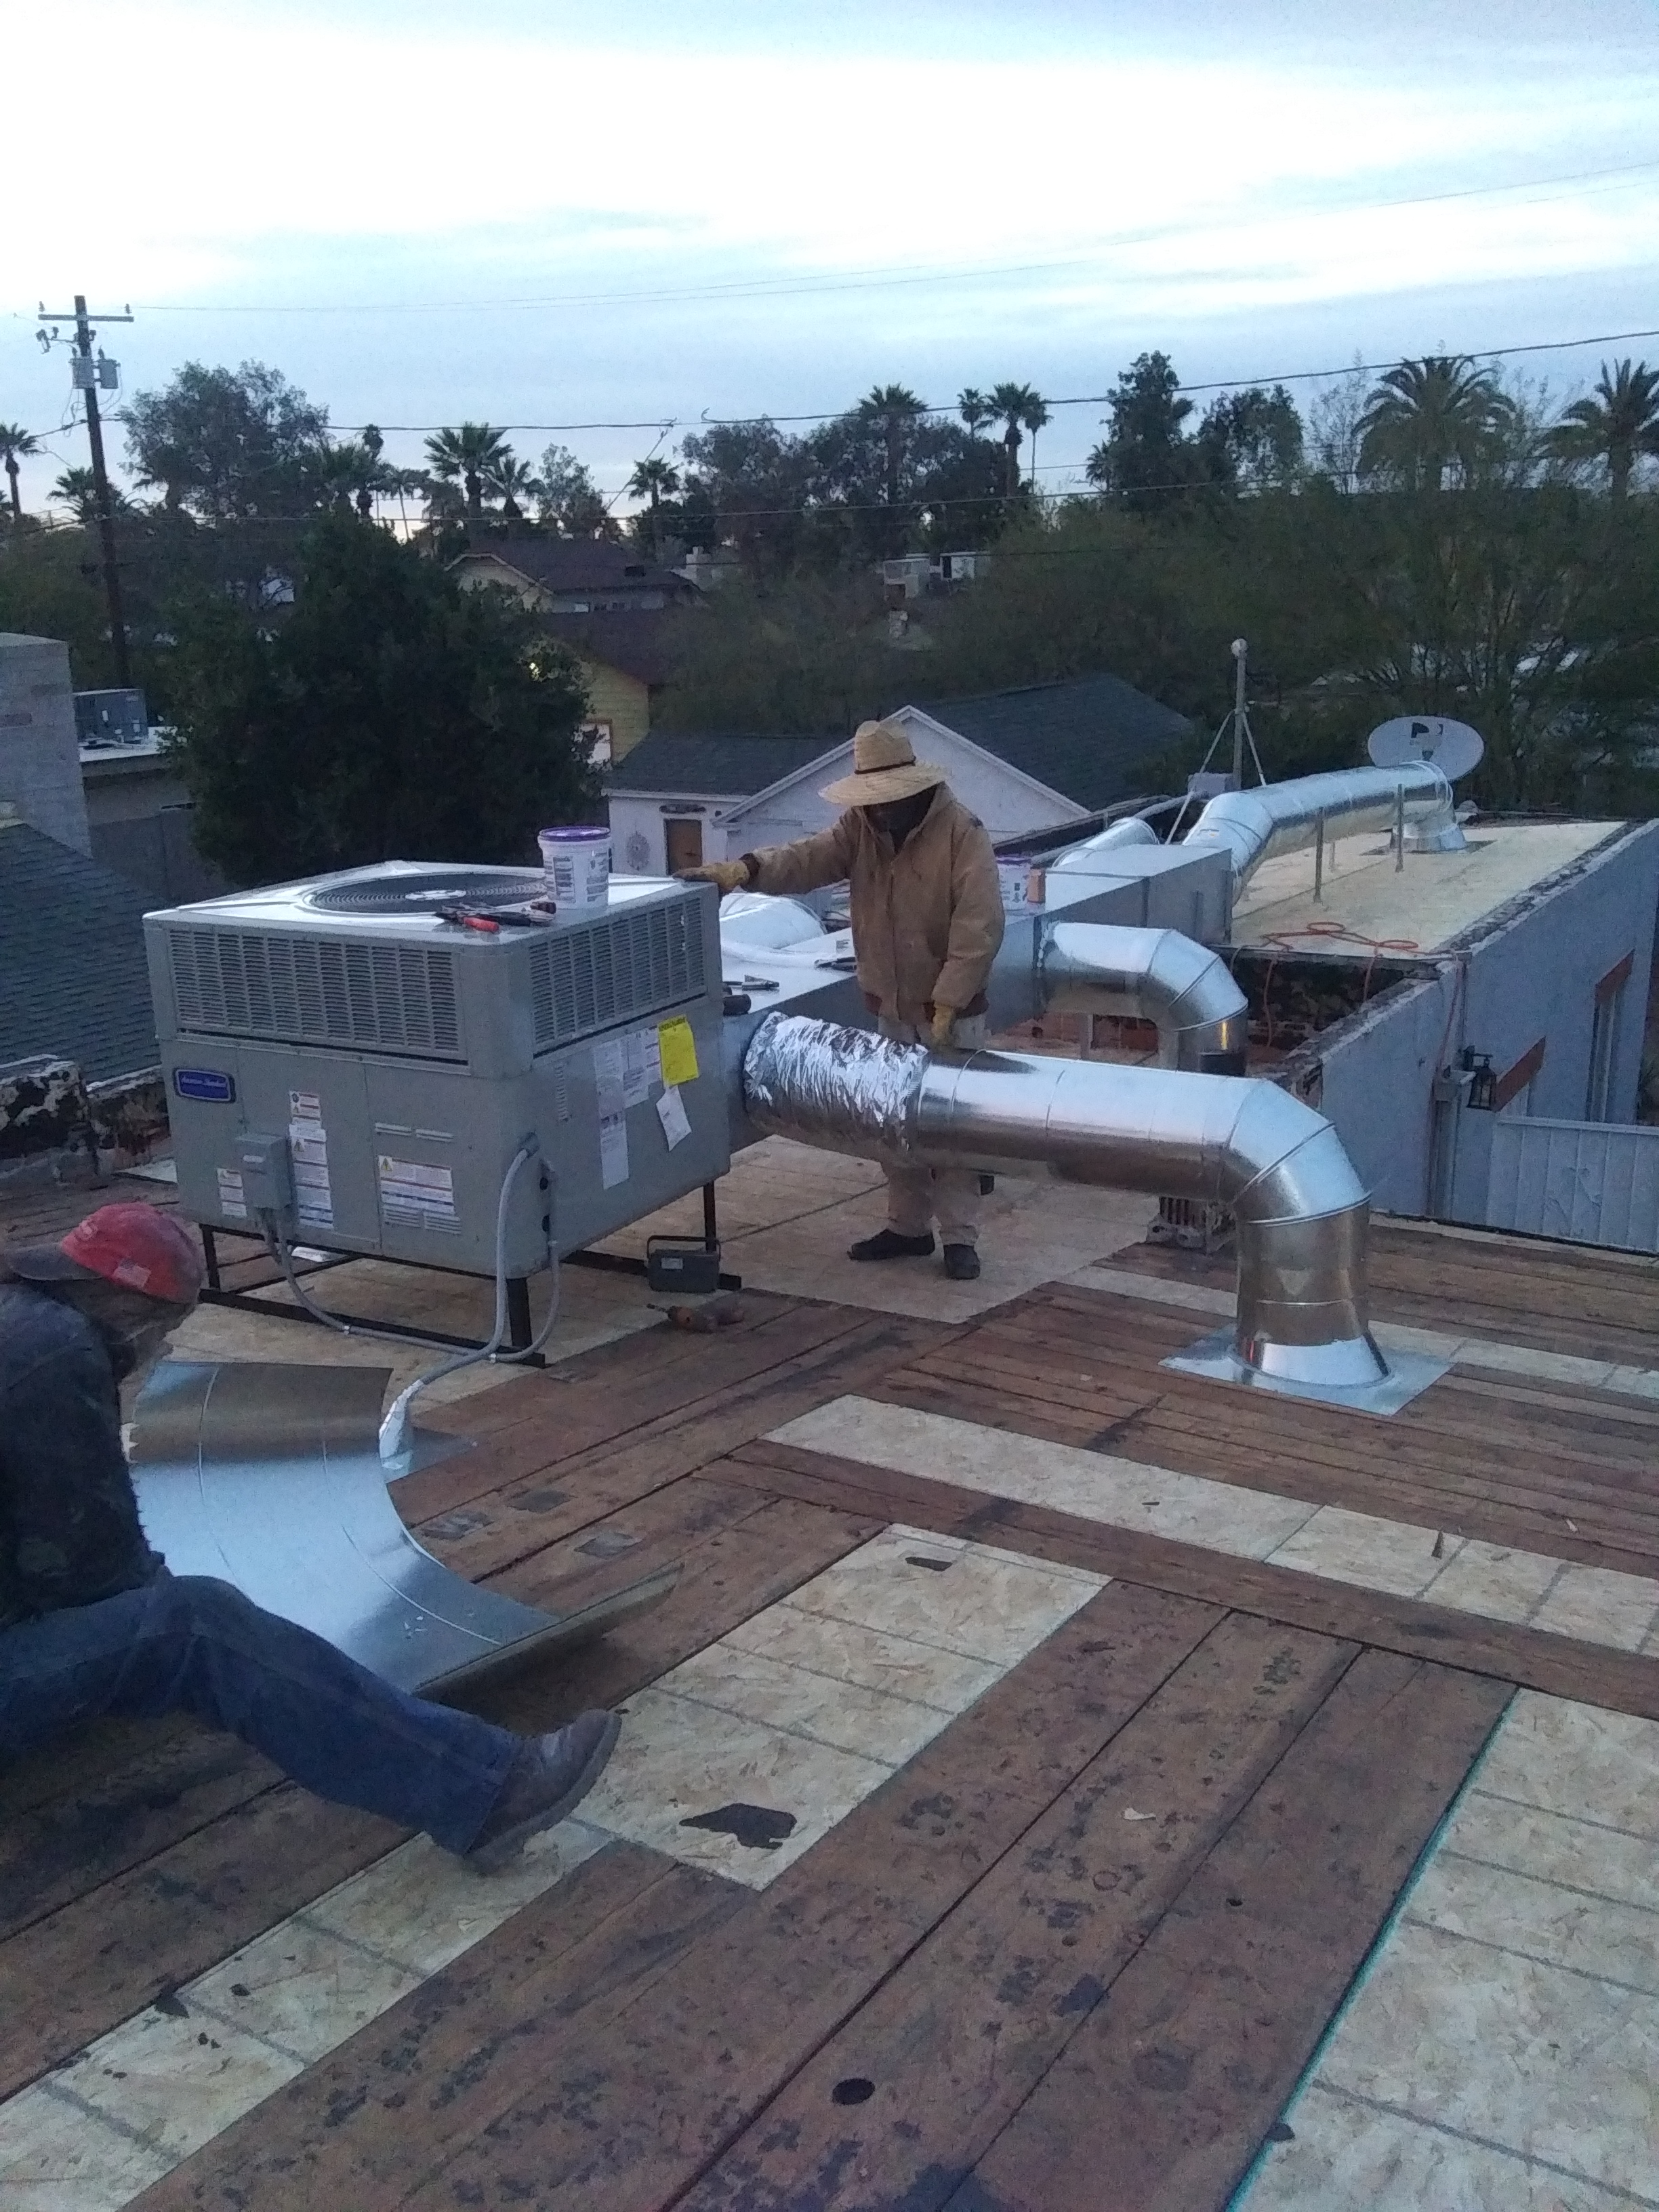 Exposed roof top duct work